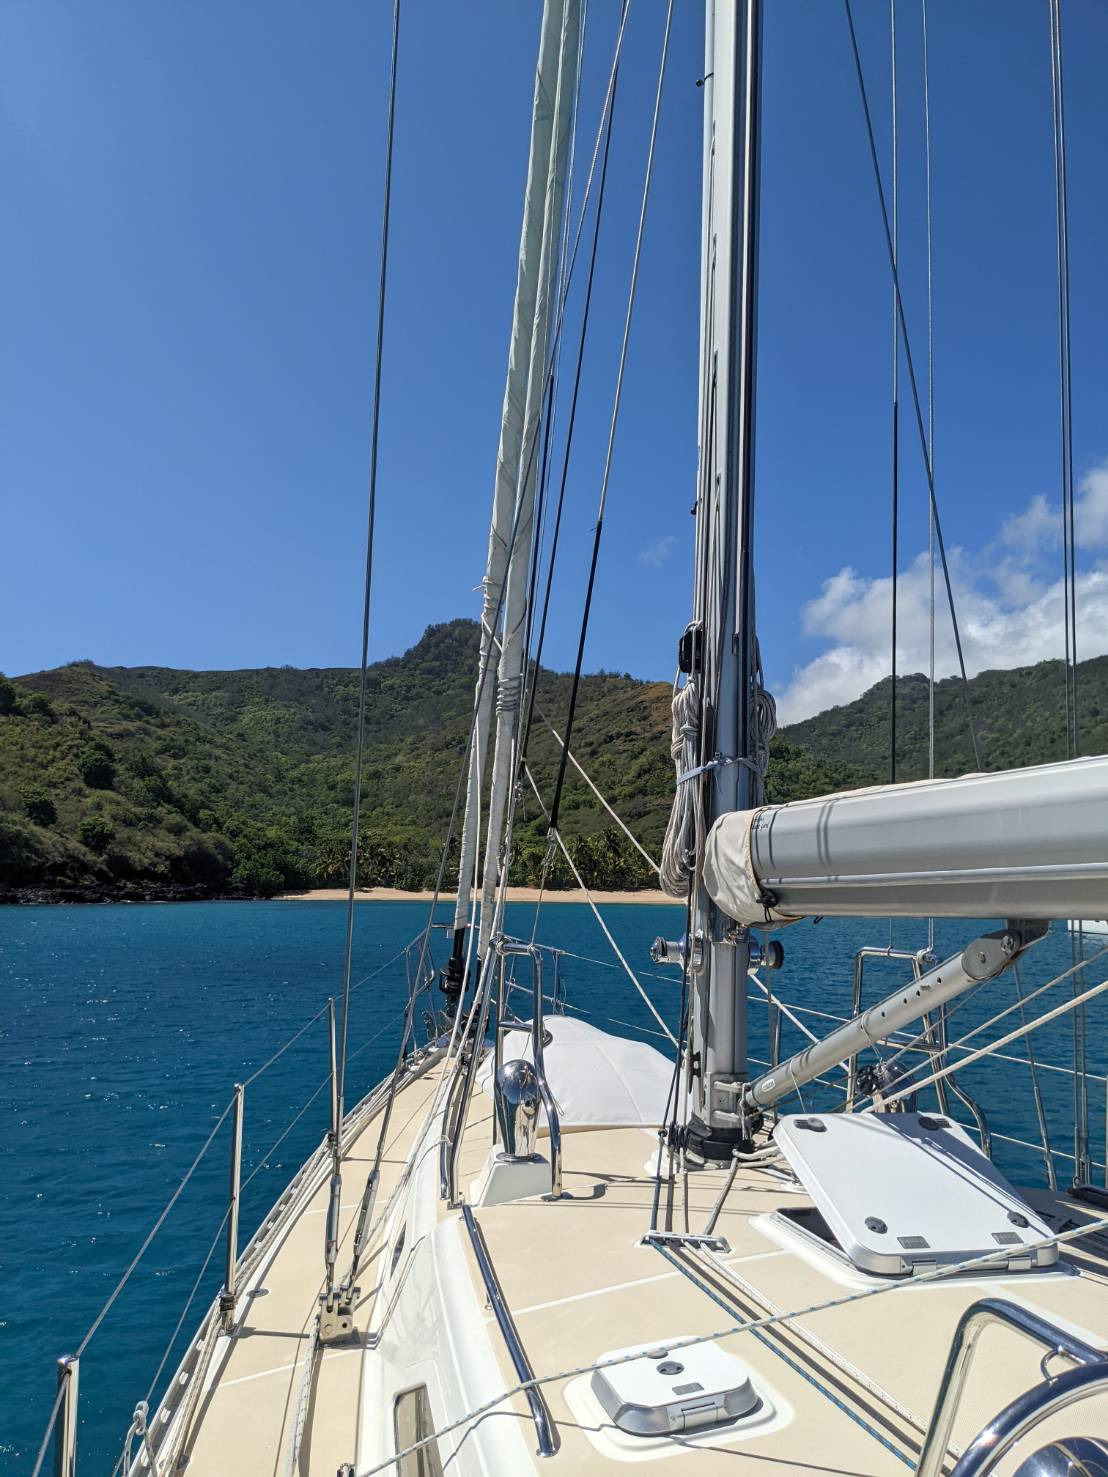 Horizon is now back in the water, Yay 😁 We can highly recommend the boatyard in Hiva Oa., they are very professional. We are now at anchor waiting for a weather window to sail to Makemo in the Tuamotus